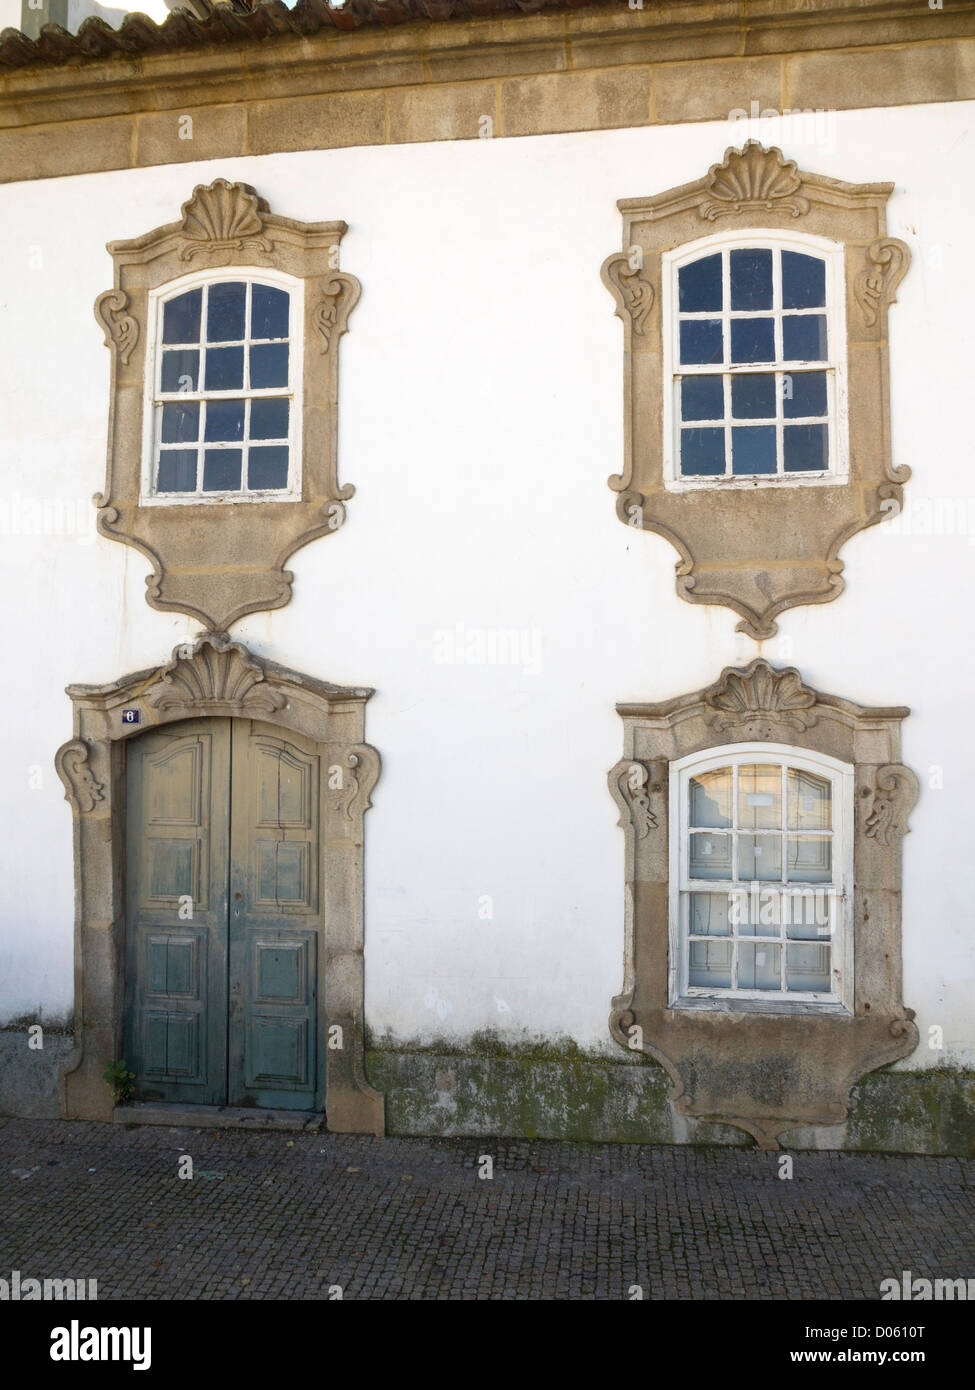 Ornamented stone framed windows and door Stock Photo